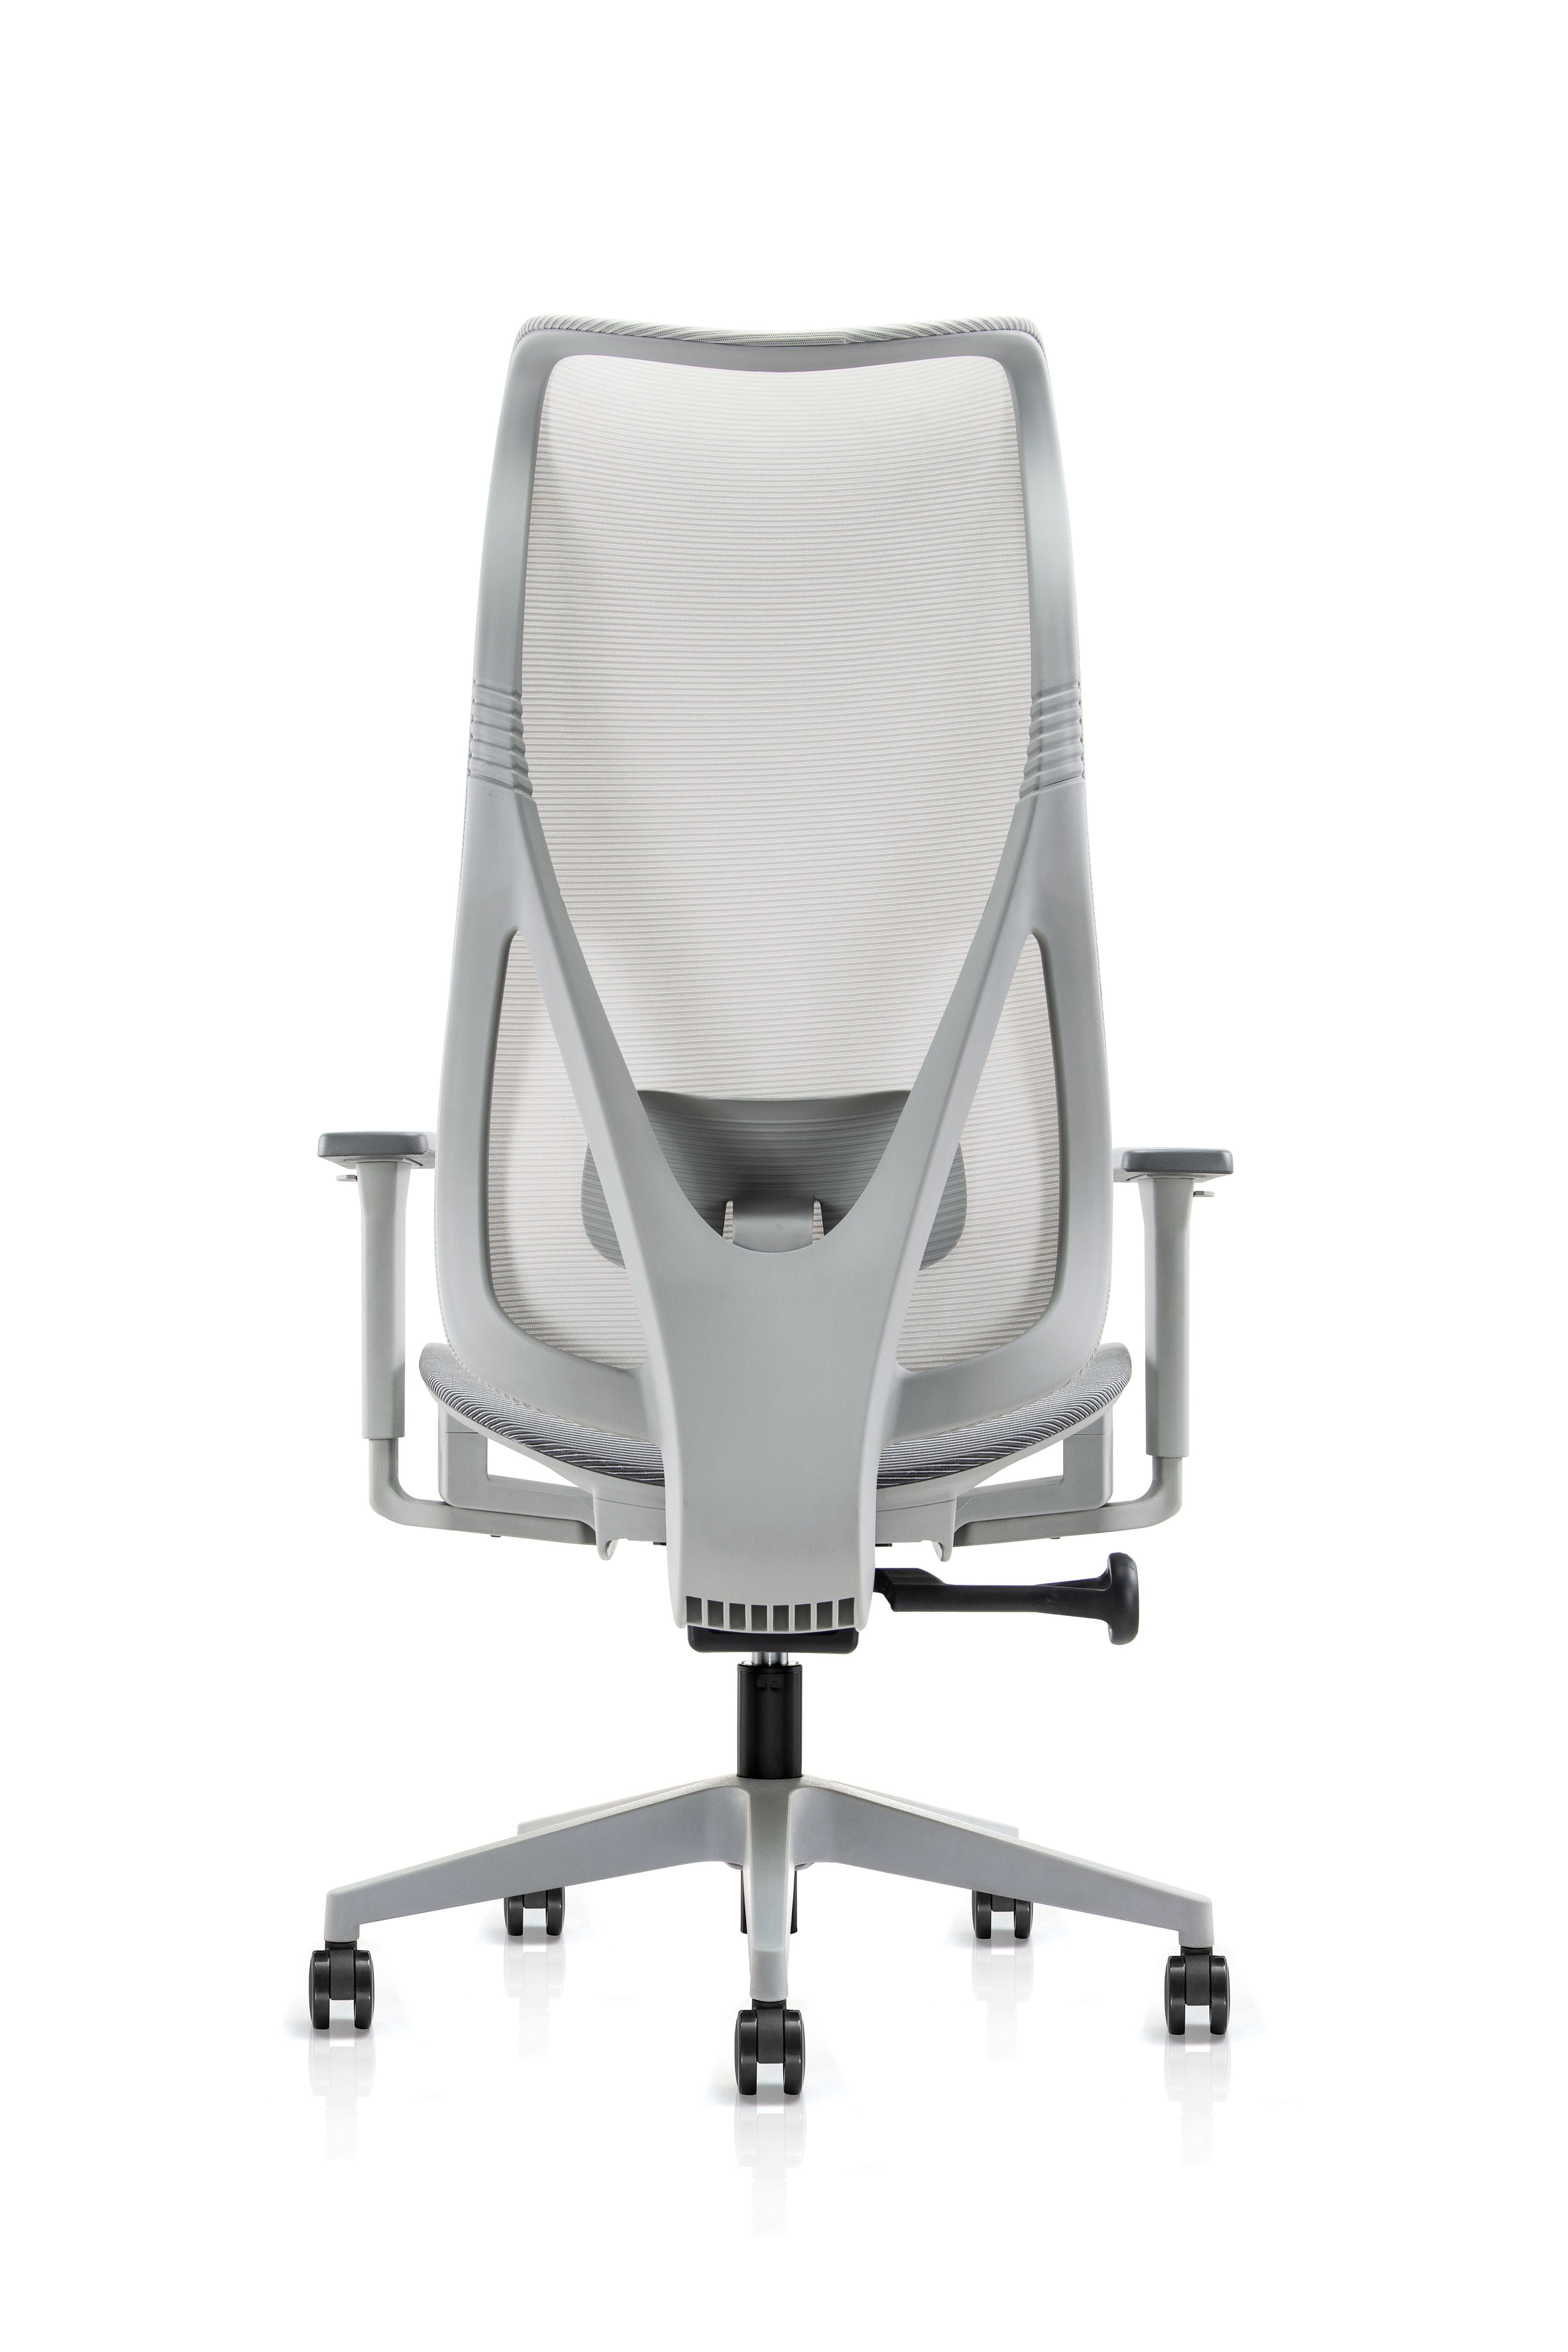 Luis office chair With Mesh Seat, 3D Armrest And Aluminum diecast base - Grey